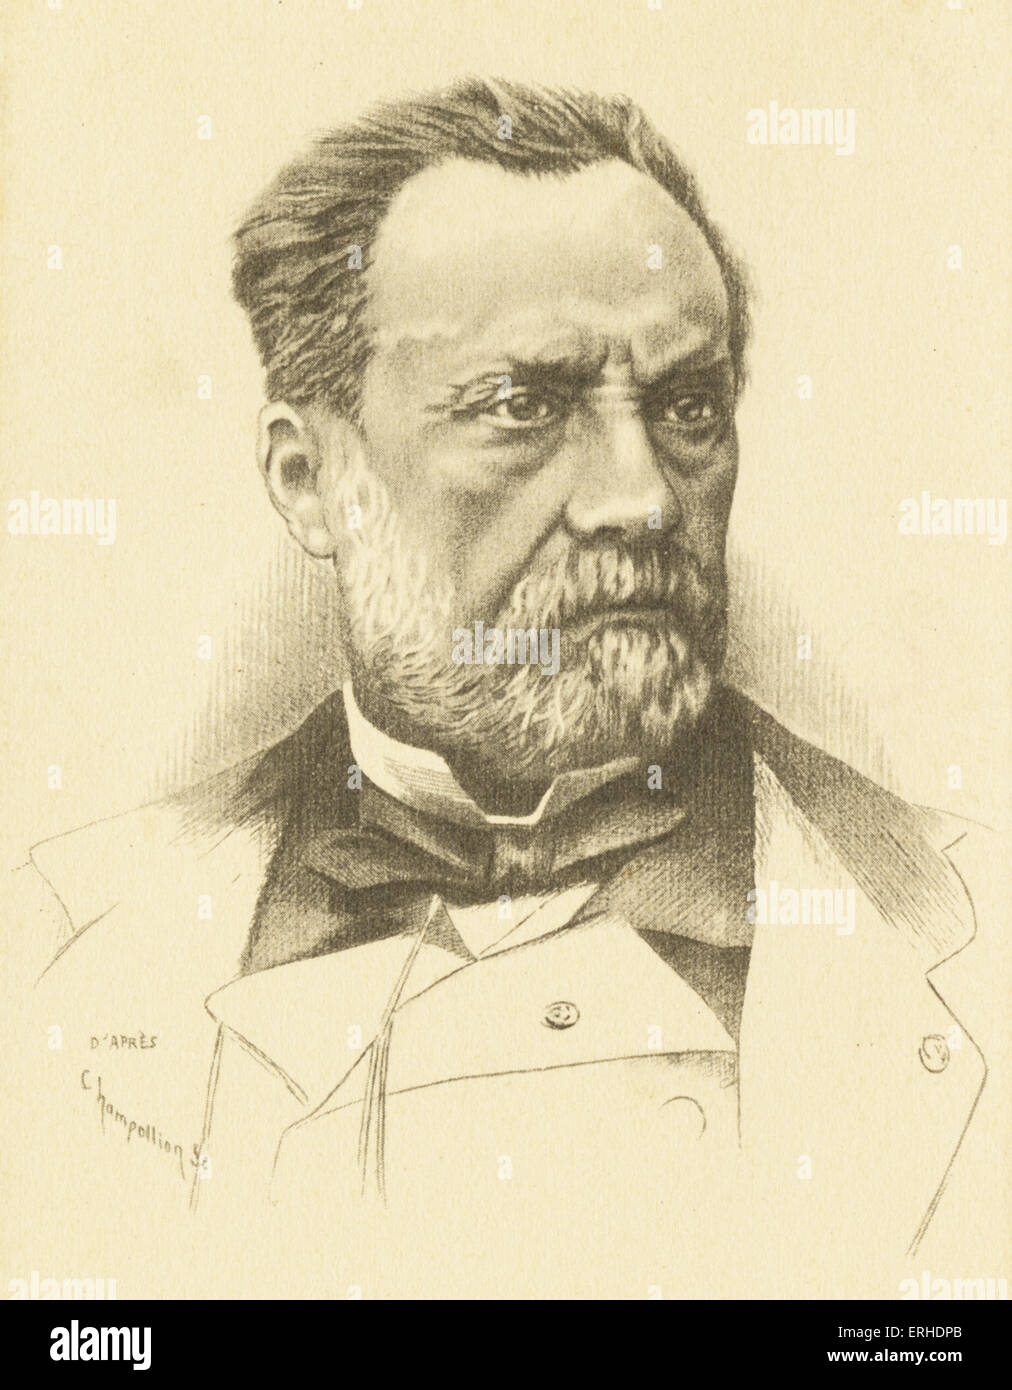 Louis Pasteur, portrait,  French scientist 1822 - 1895, inventor of process of pasteurisation and obtaining vaccines Stock Photo